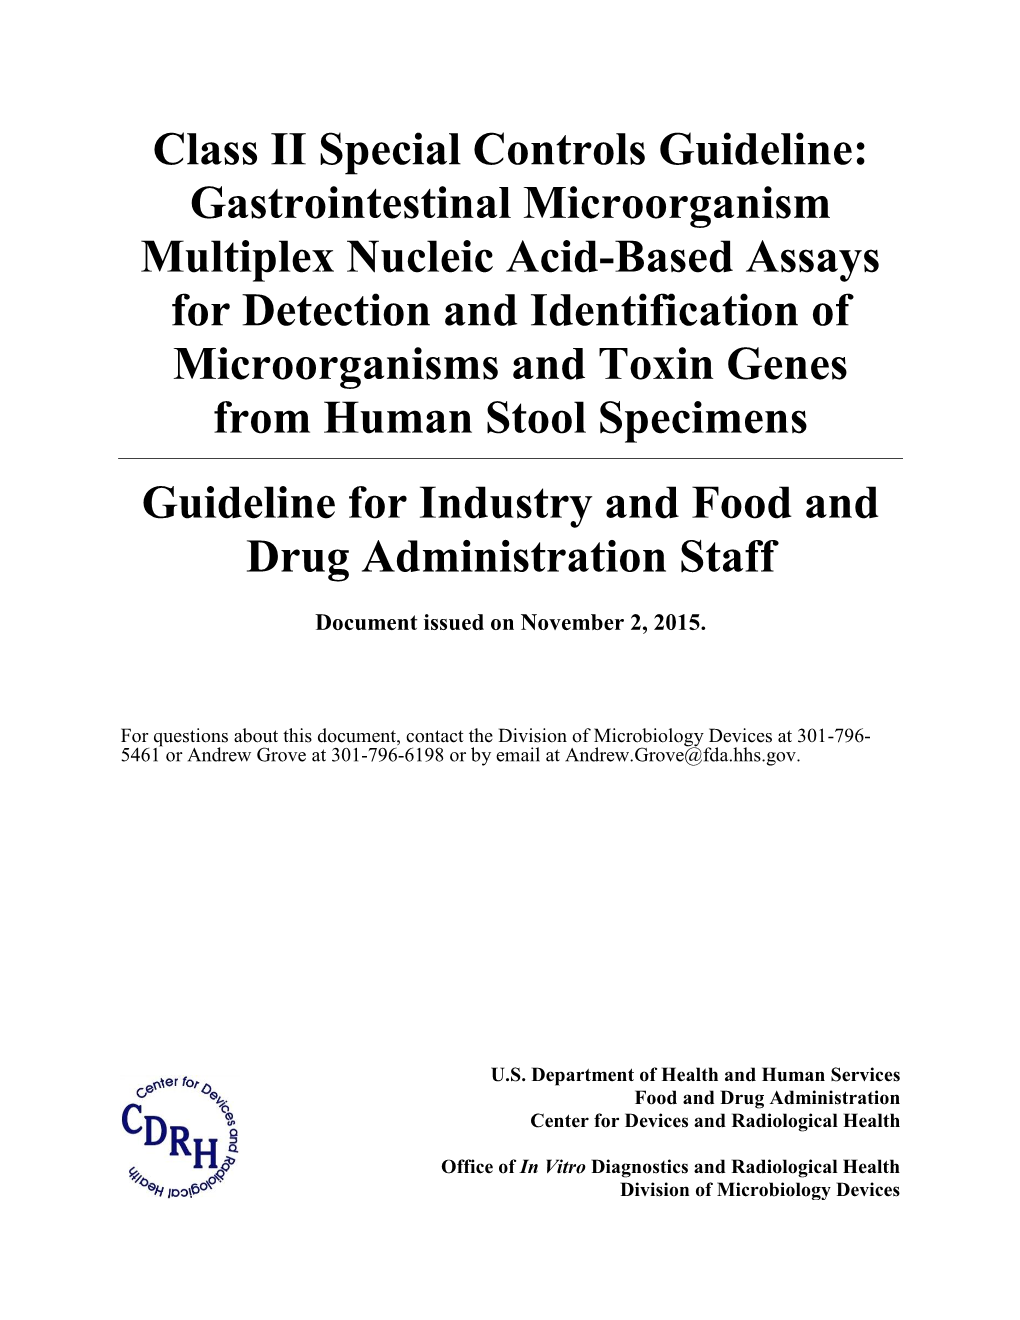 Class II Special Controls Guideline: Gastrointestinal Microorganism Multiplex Nucleic Acid-Based Assays for Detection and Identi